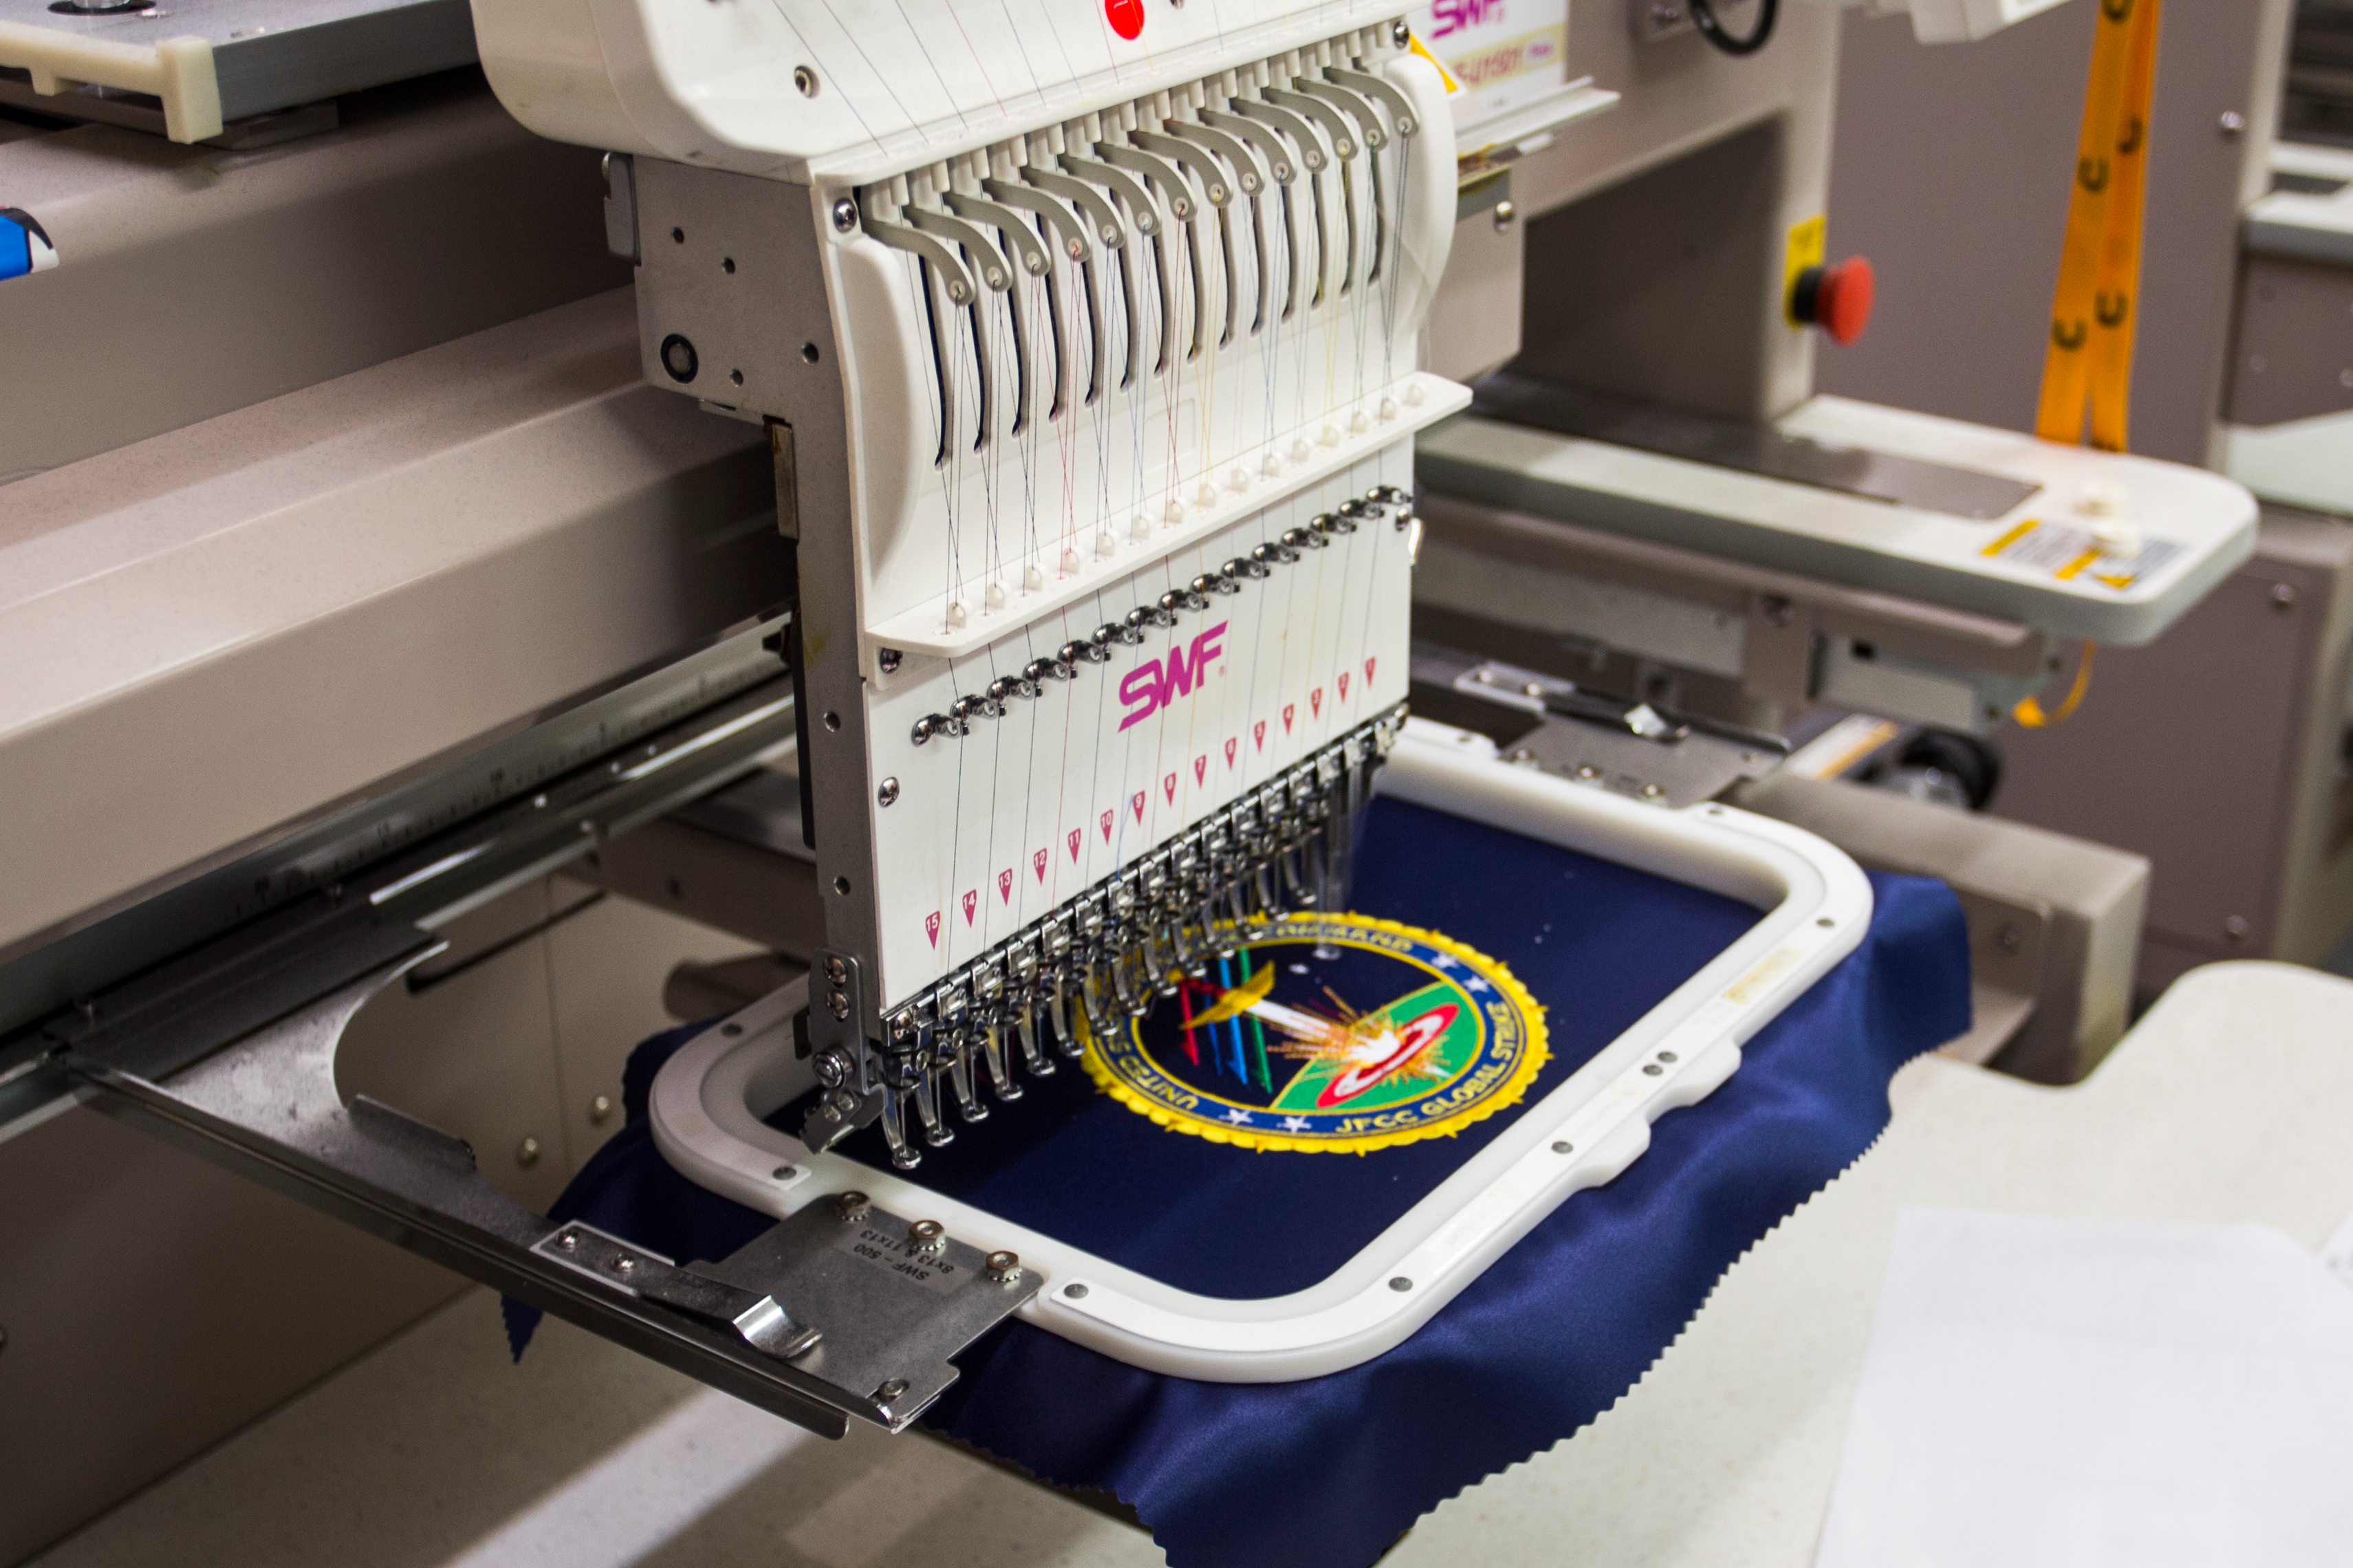 Corporate Creations - Embroidery in Action